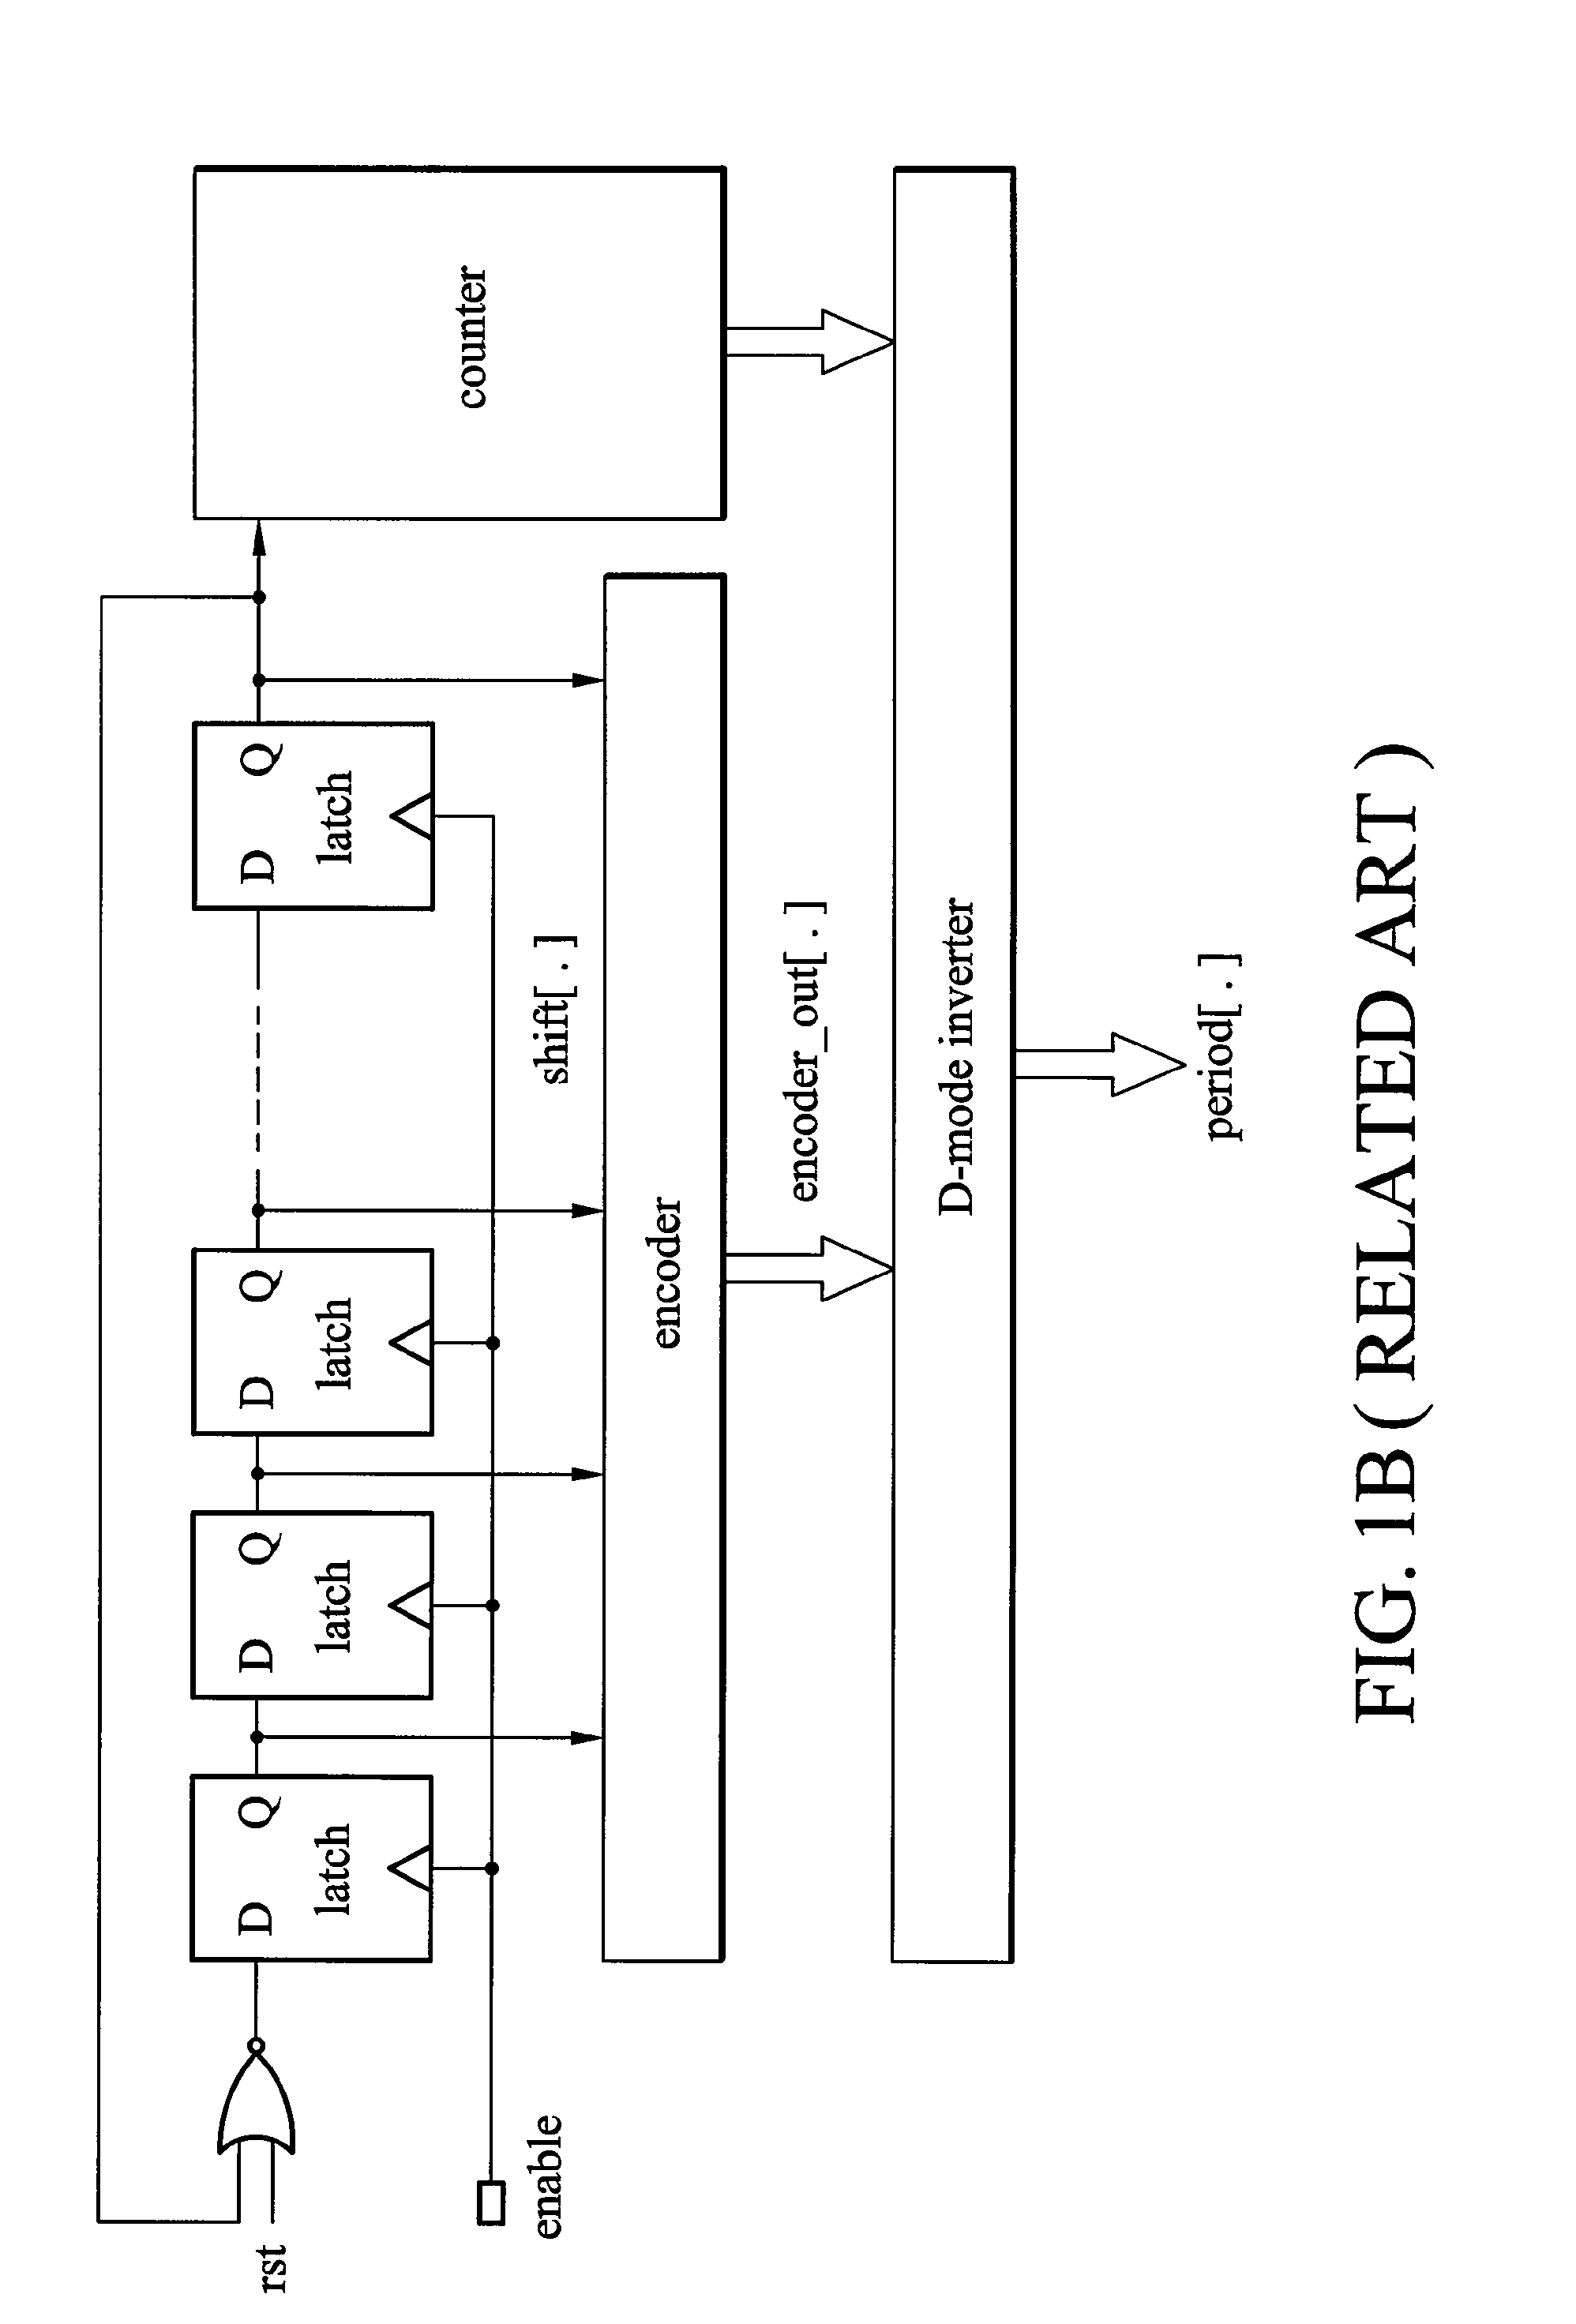 Built-in self test circuit for analog-to-digital converter and phase lock loop and the testing methods thereof